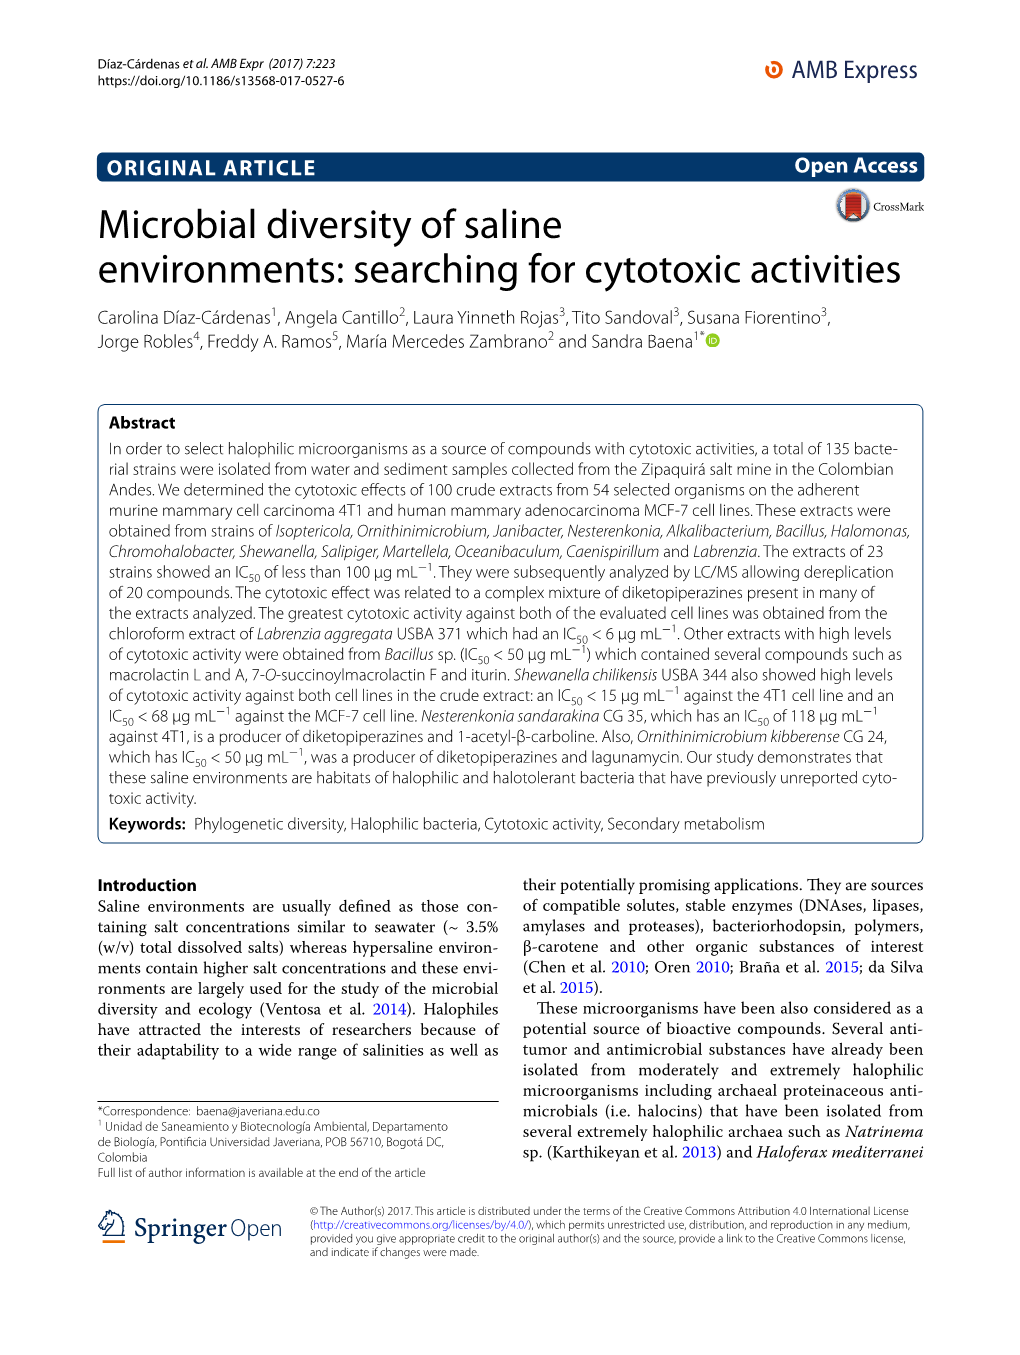 Microbial Diversity of Saline Environments